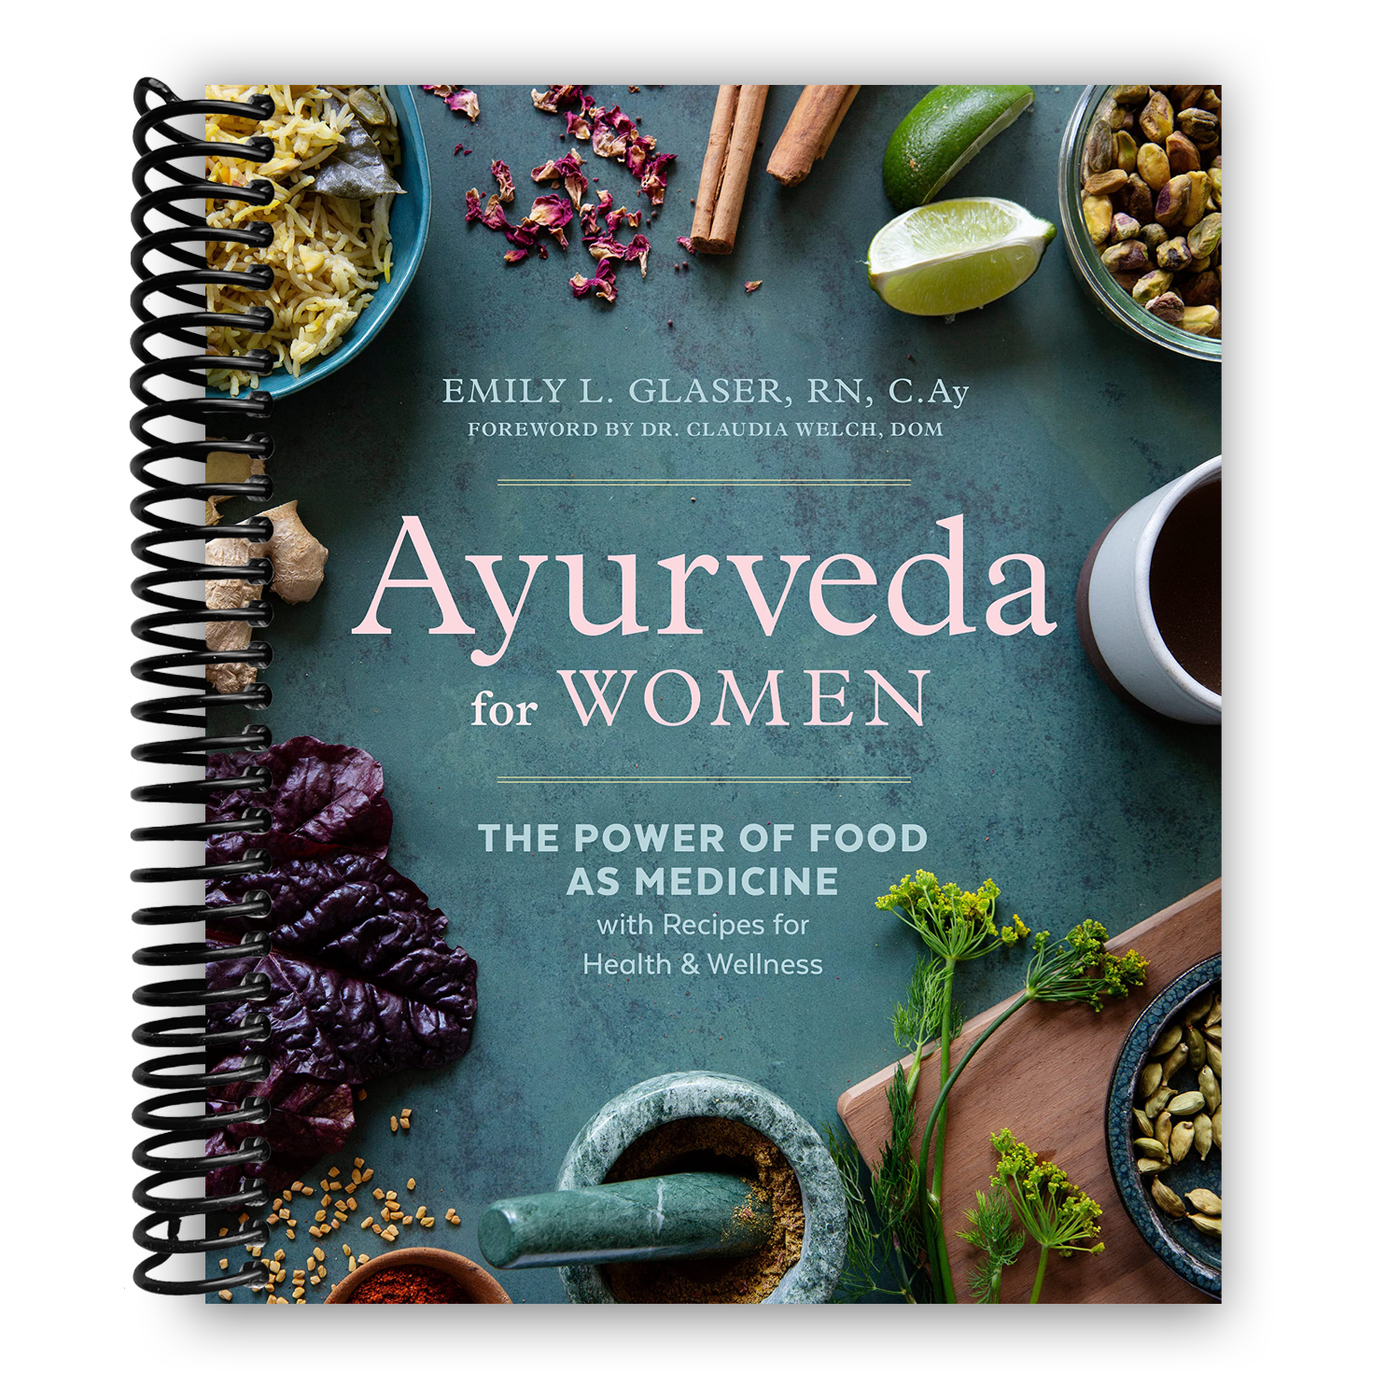 Ayurveda for Women: The Power of Food as Medicine with Recipes for Health and Wellness (Spiral Bound)